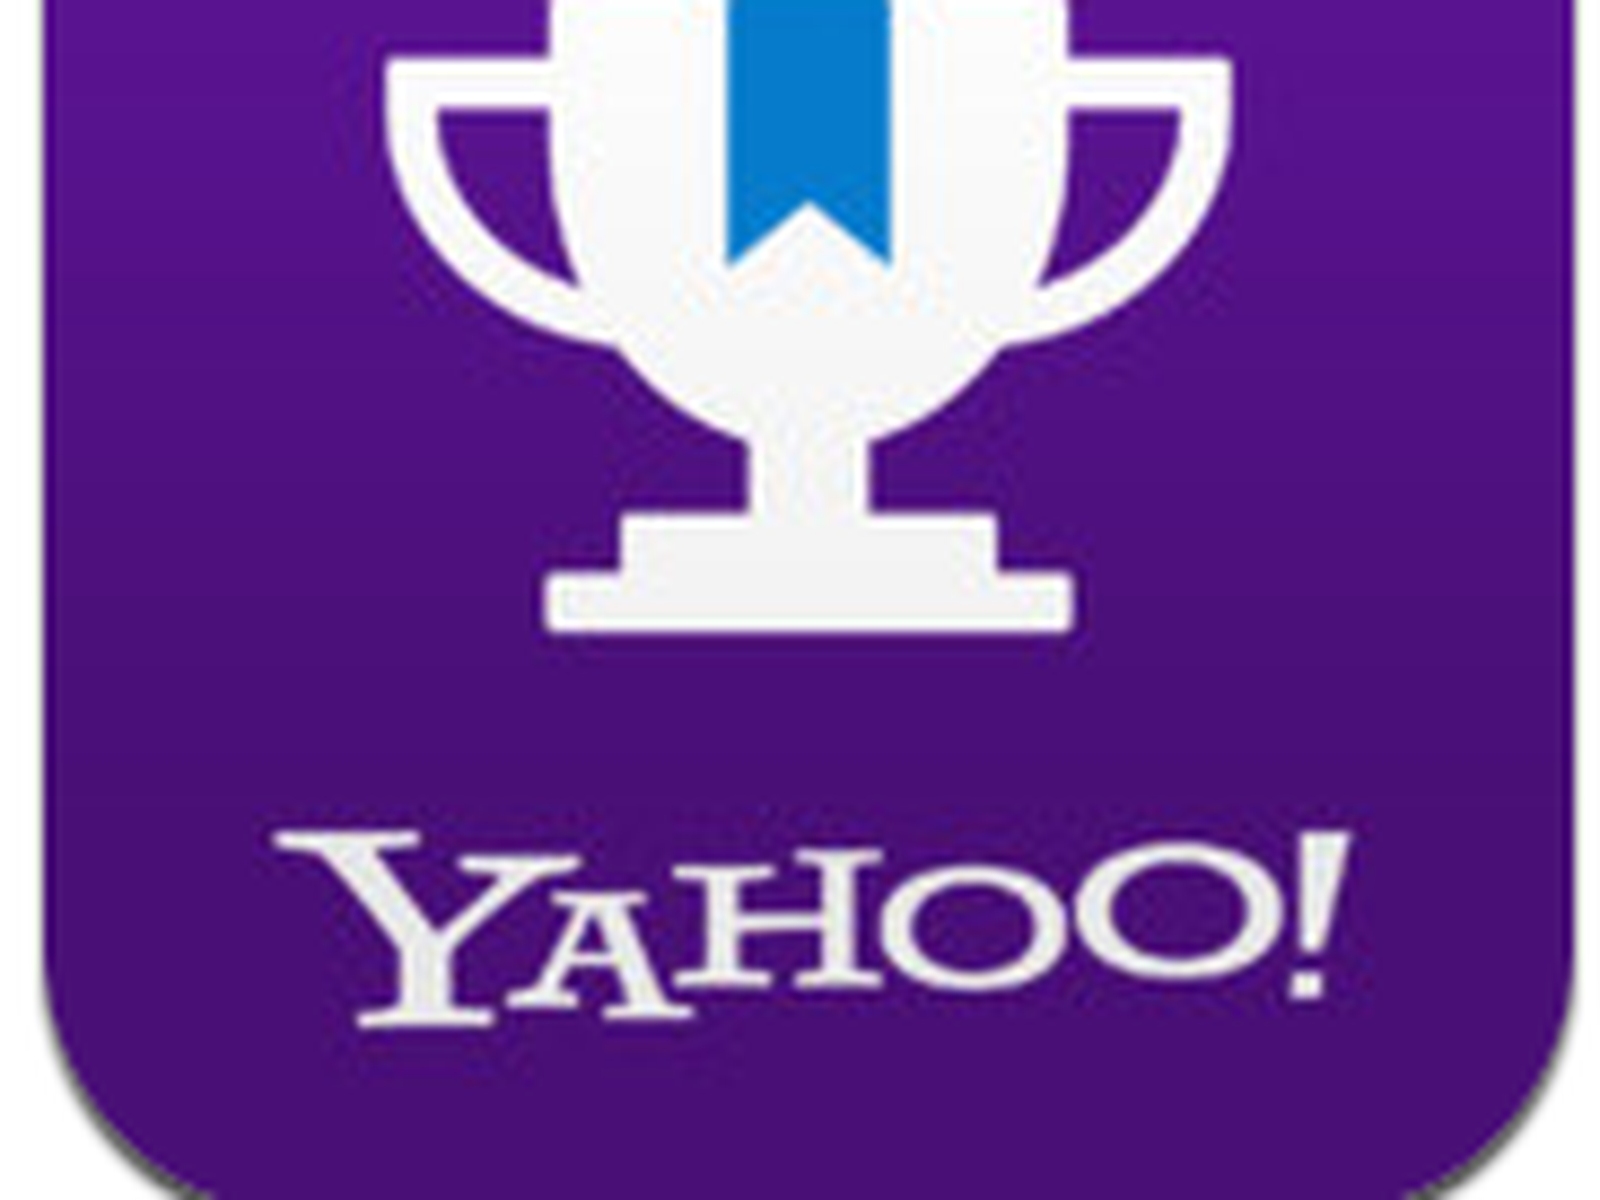 Yahoo Fantasy Sports has updated our live draft experience with